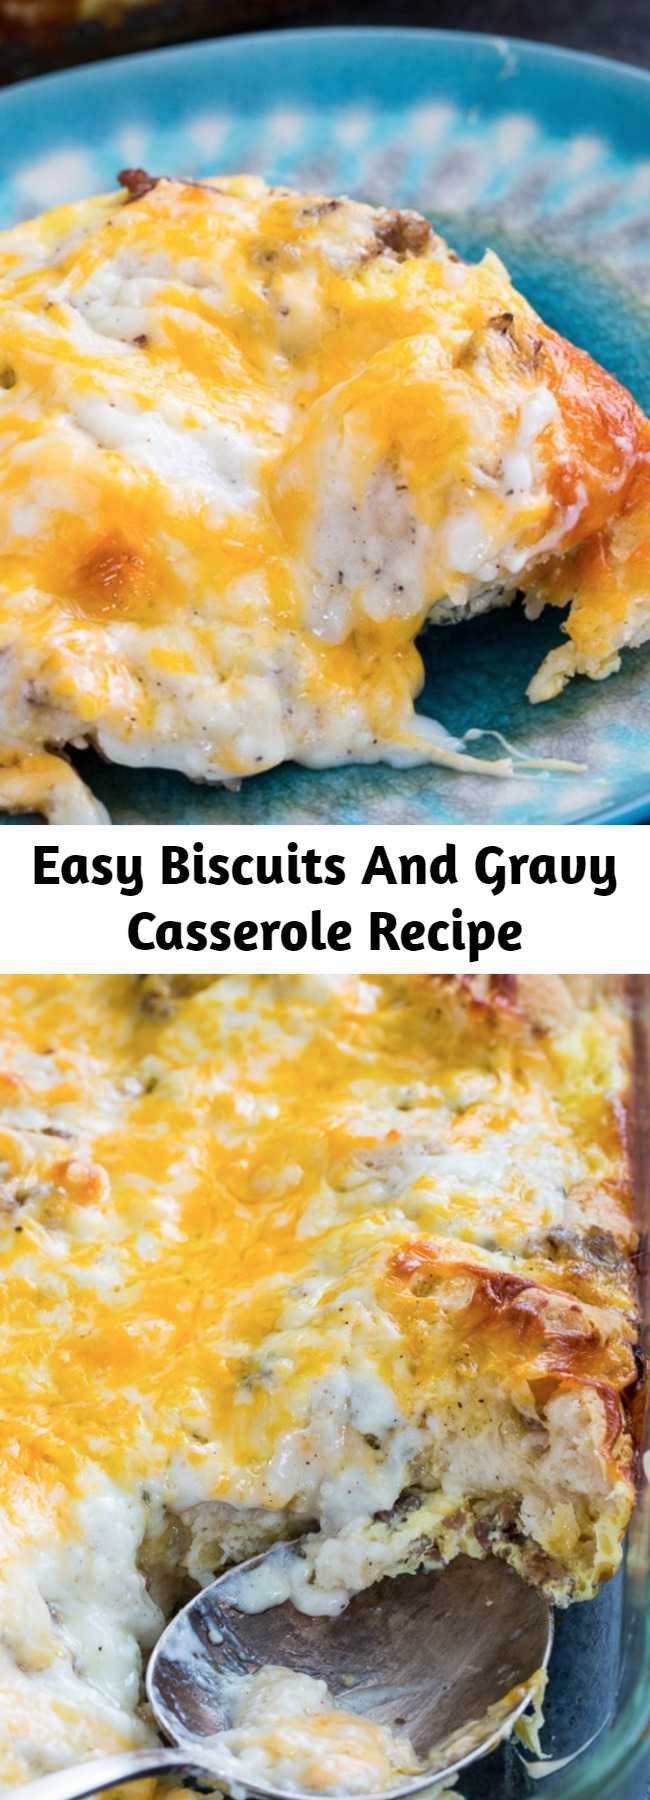 Easy Biscuits And Gravy Casserole Recipe - Biscuits and Gravy Casserole has all the flavor of the southern classic-Biscuits and Sausage Gravy, in casserole form and it couldn't be easier to make.